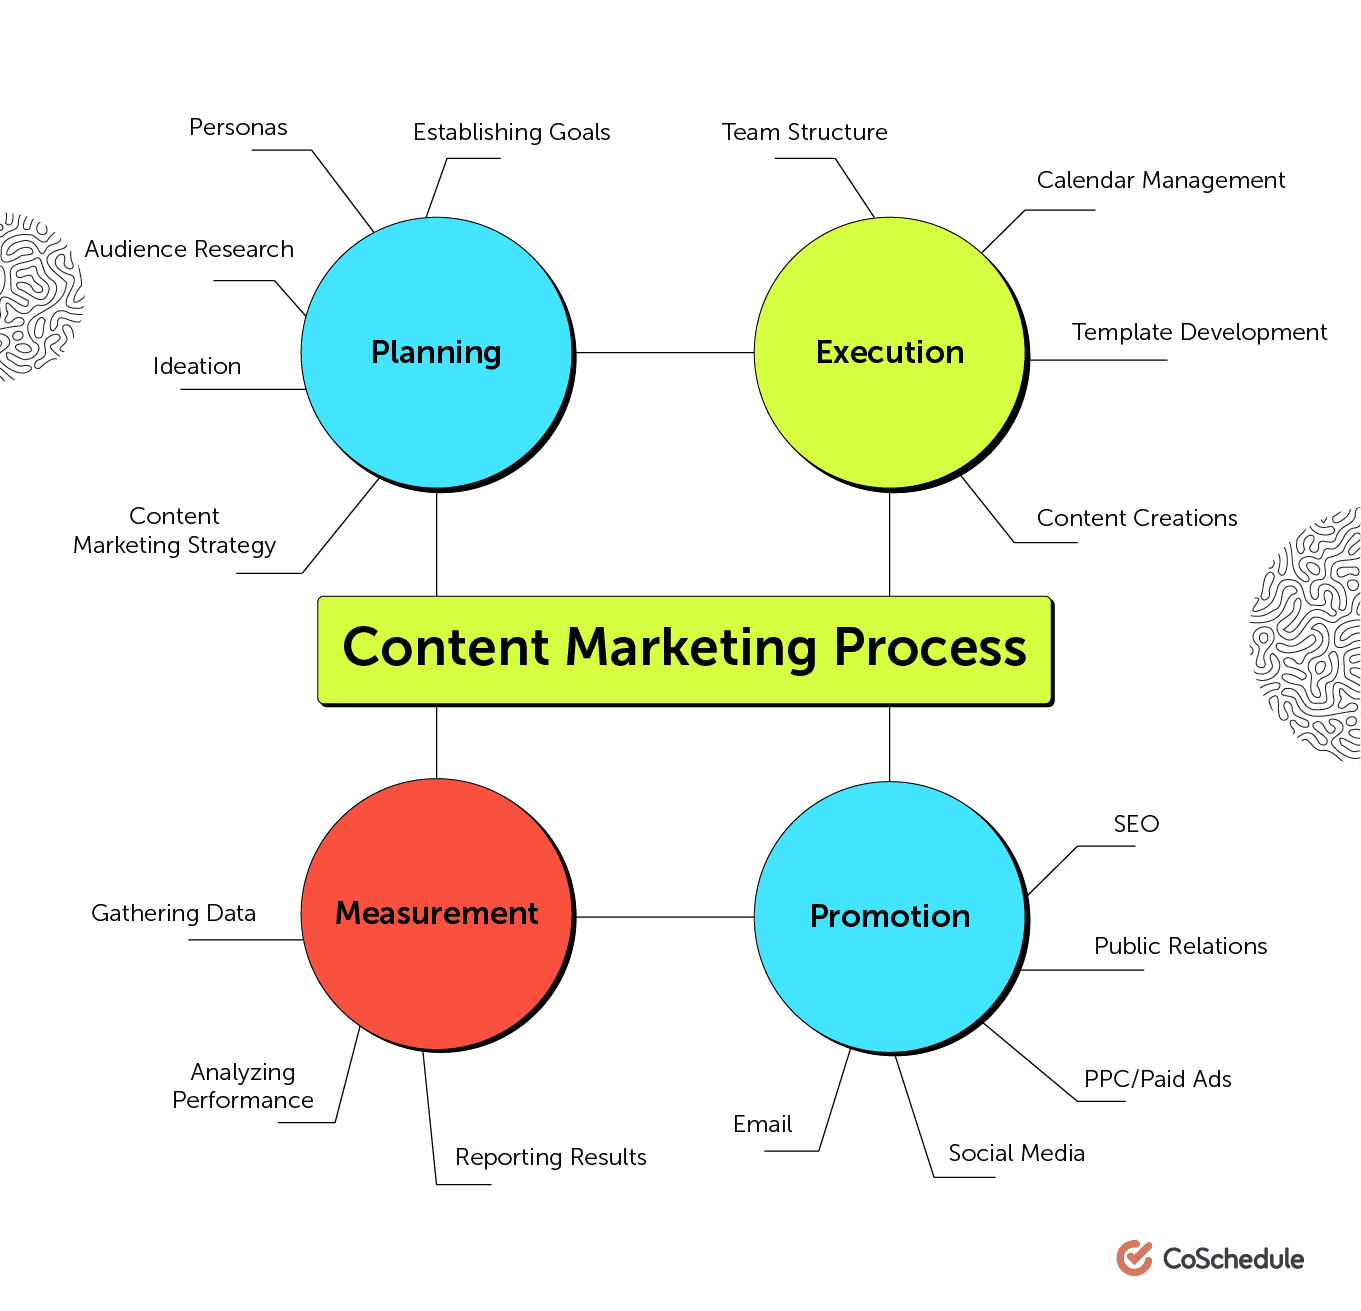 Mind map of the content marketing process